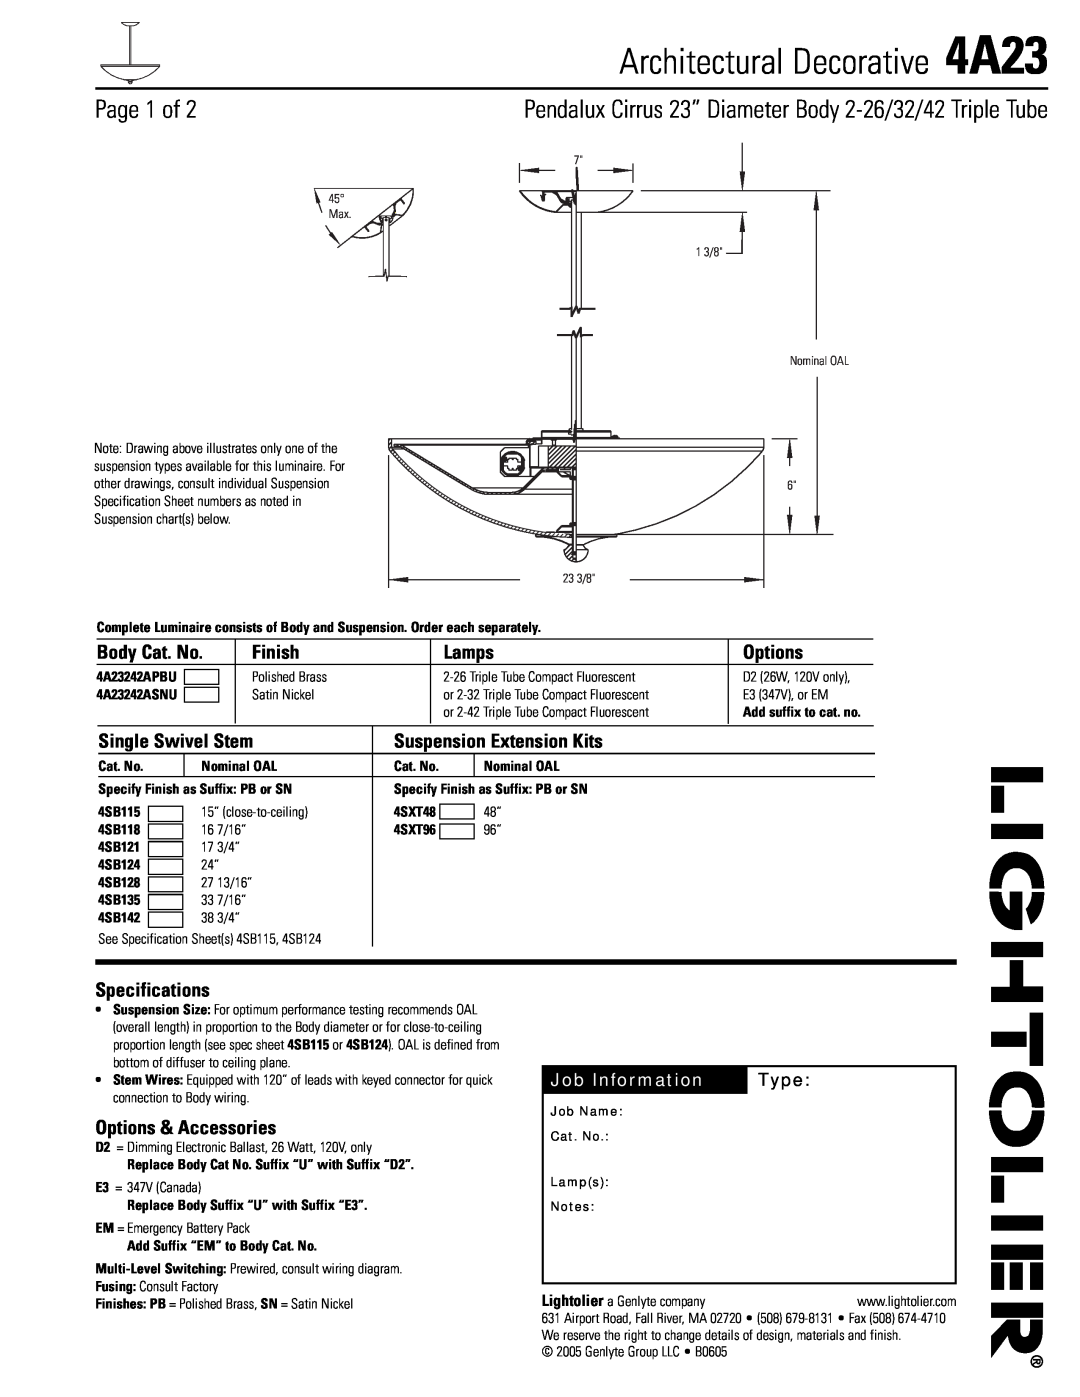 Lightolier specifications Architectural Decorative 4A23, Page 1 of, Body Cat. No, Finish, Lamps, Options, Type 